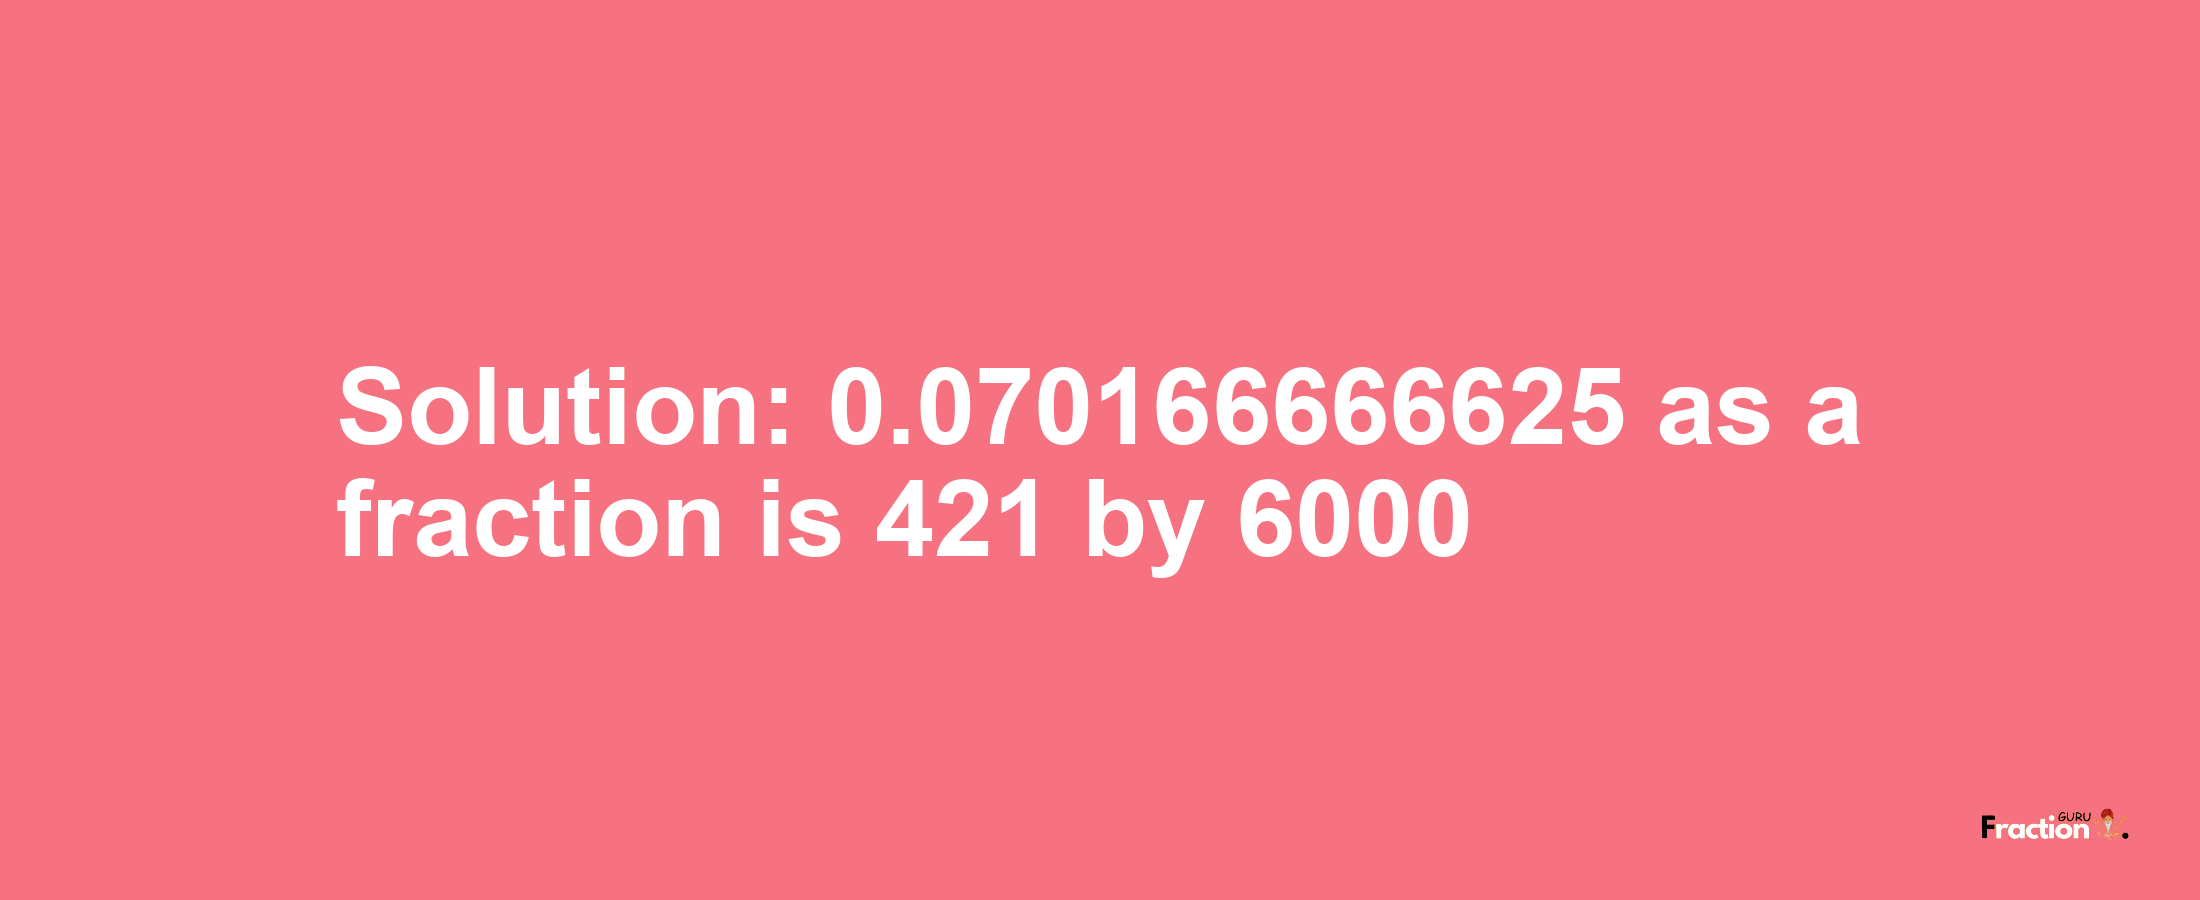 Solution:0.070166666625 as a fraction is 421/6000